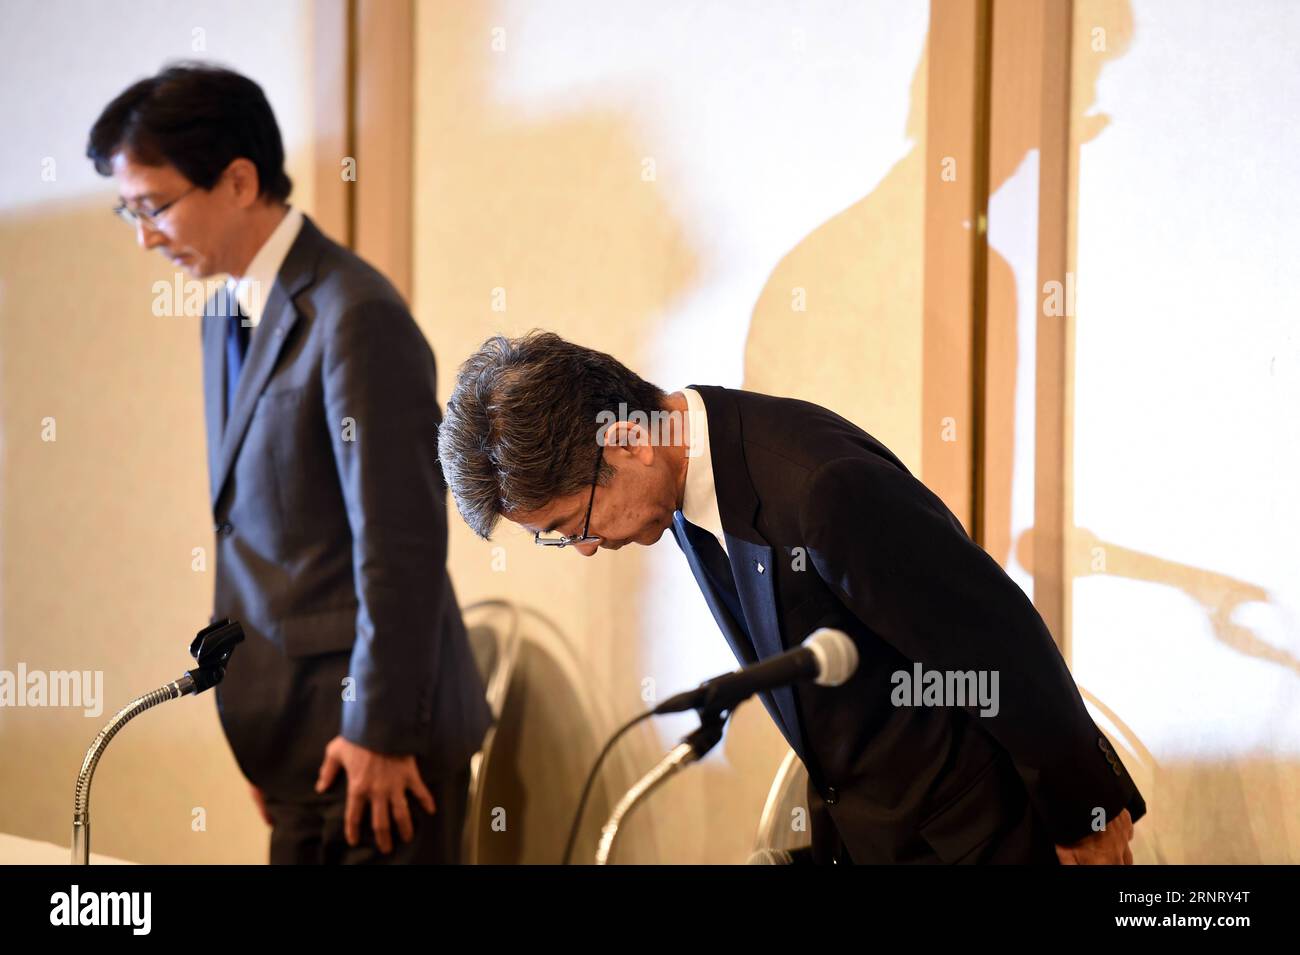 (171021) -- TOKYO, Oct. 21, 2017 -- Kobe Steel Executive Vice President Naoto Umehara (R) bows during a press conference in Tokyo, Japan, Oct. 20, 2017. Kobe Steel Ltd. told a press conference on Friday that more of its products were found with fabricated data and some of its employees at managerial positions were found involved in cover-up of the misconduct. ) (djj) JAPAN-TOKYO-KOBE STEEL MaxPing PUBLICATIONxNOTxINxCHN Stock Photo